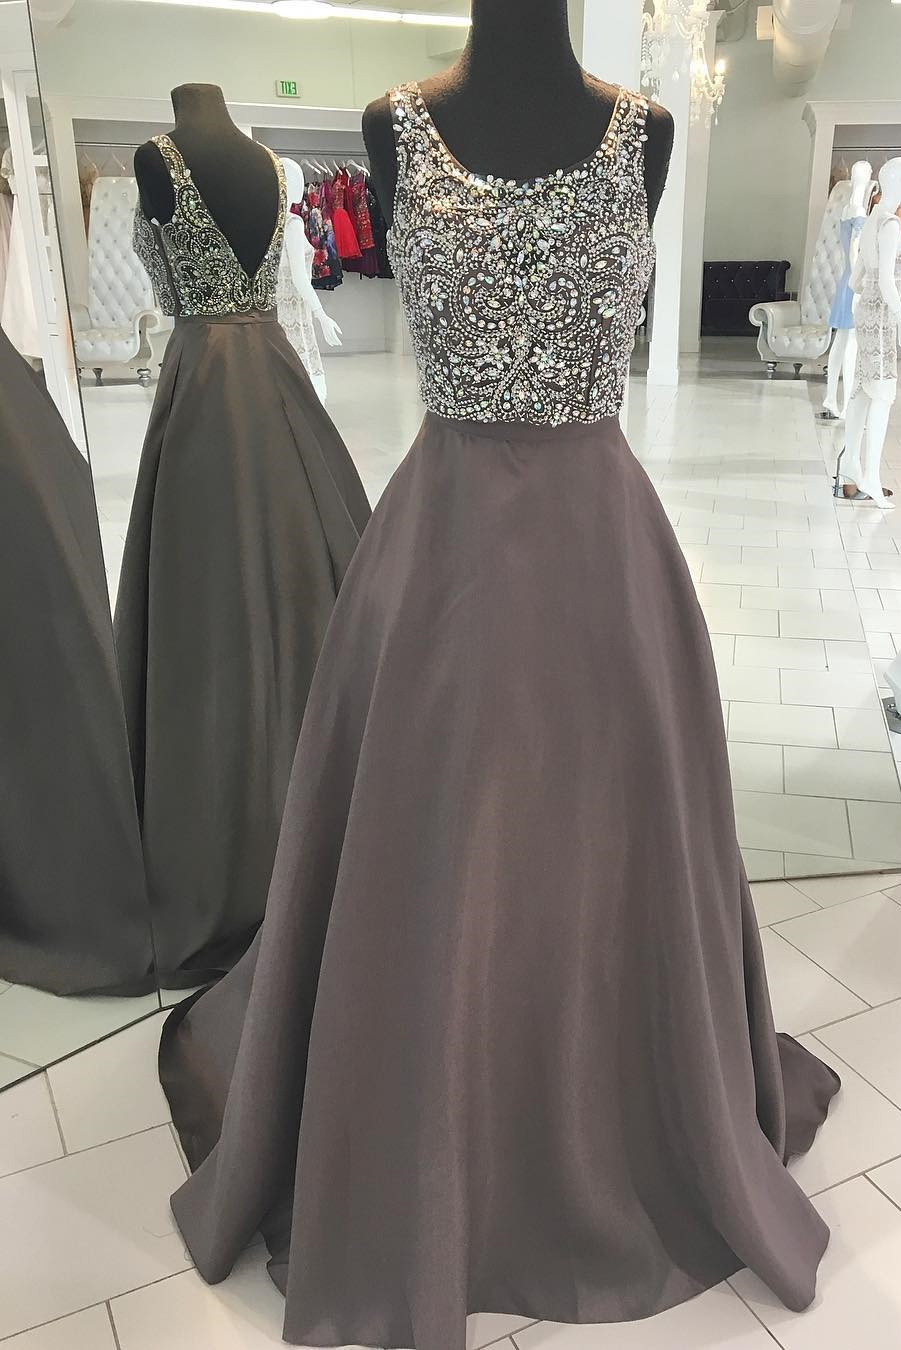  Unique A-Line Scoop Sleeveless Long Prom Dress With Beading, 